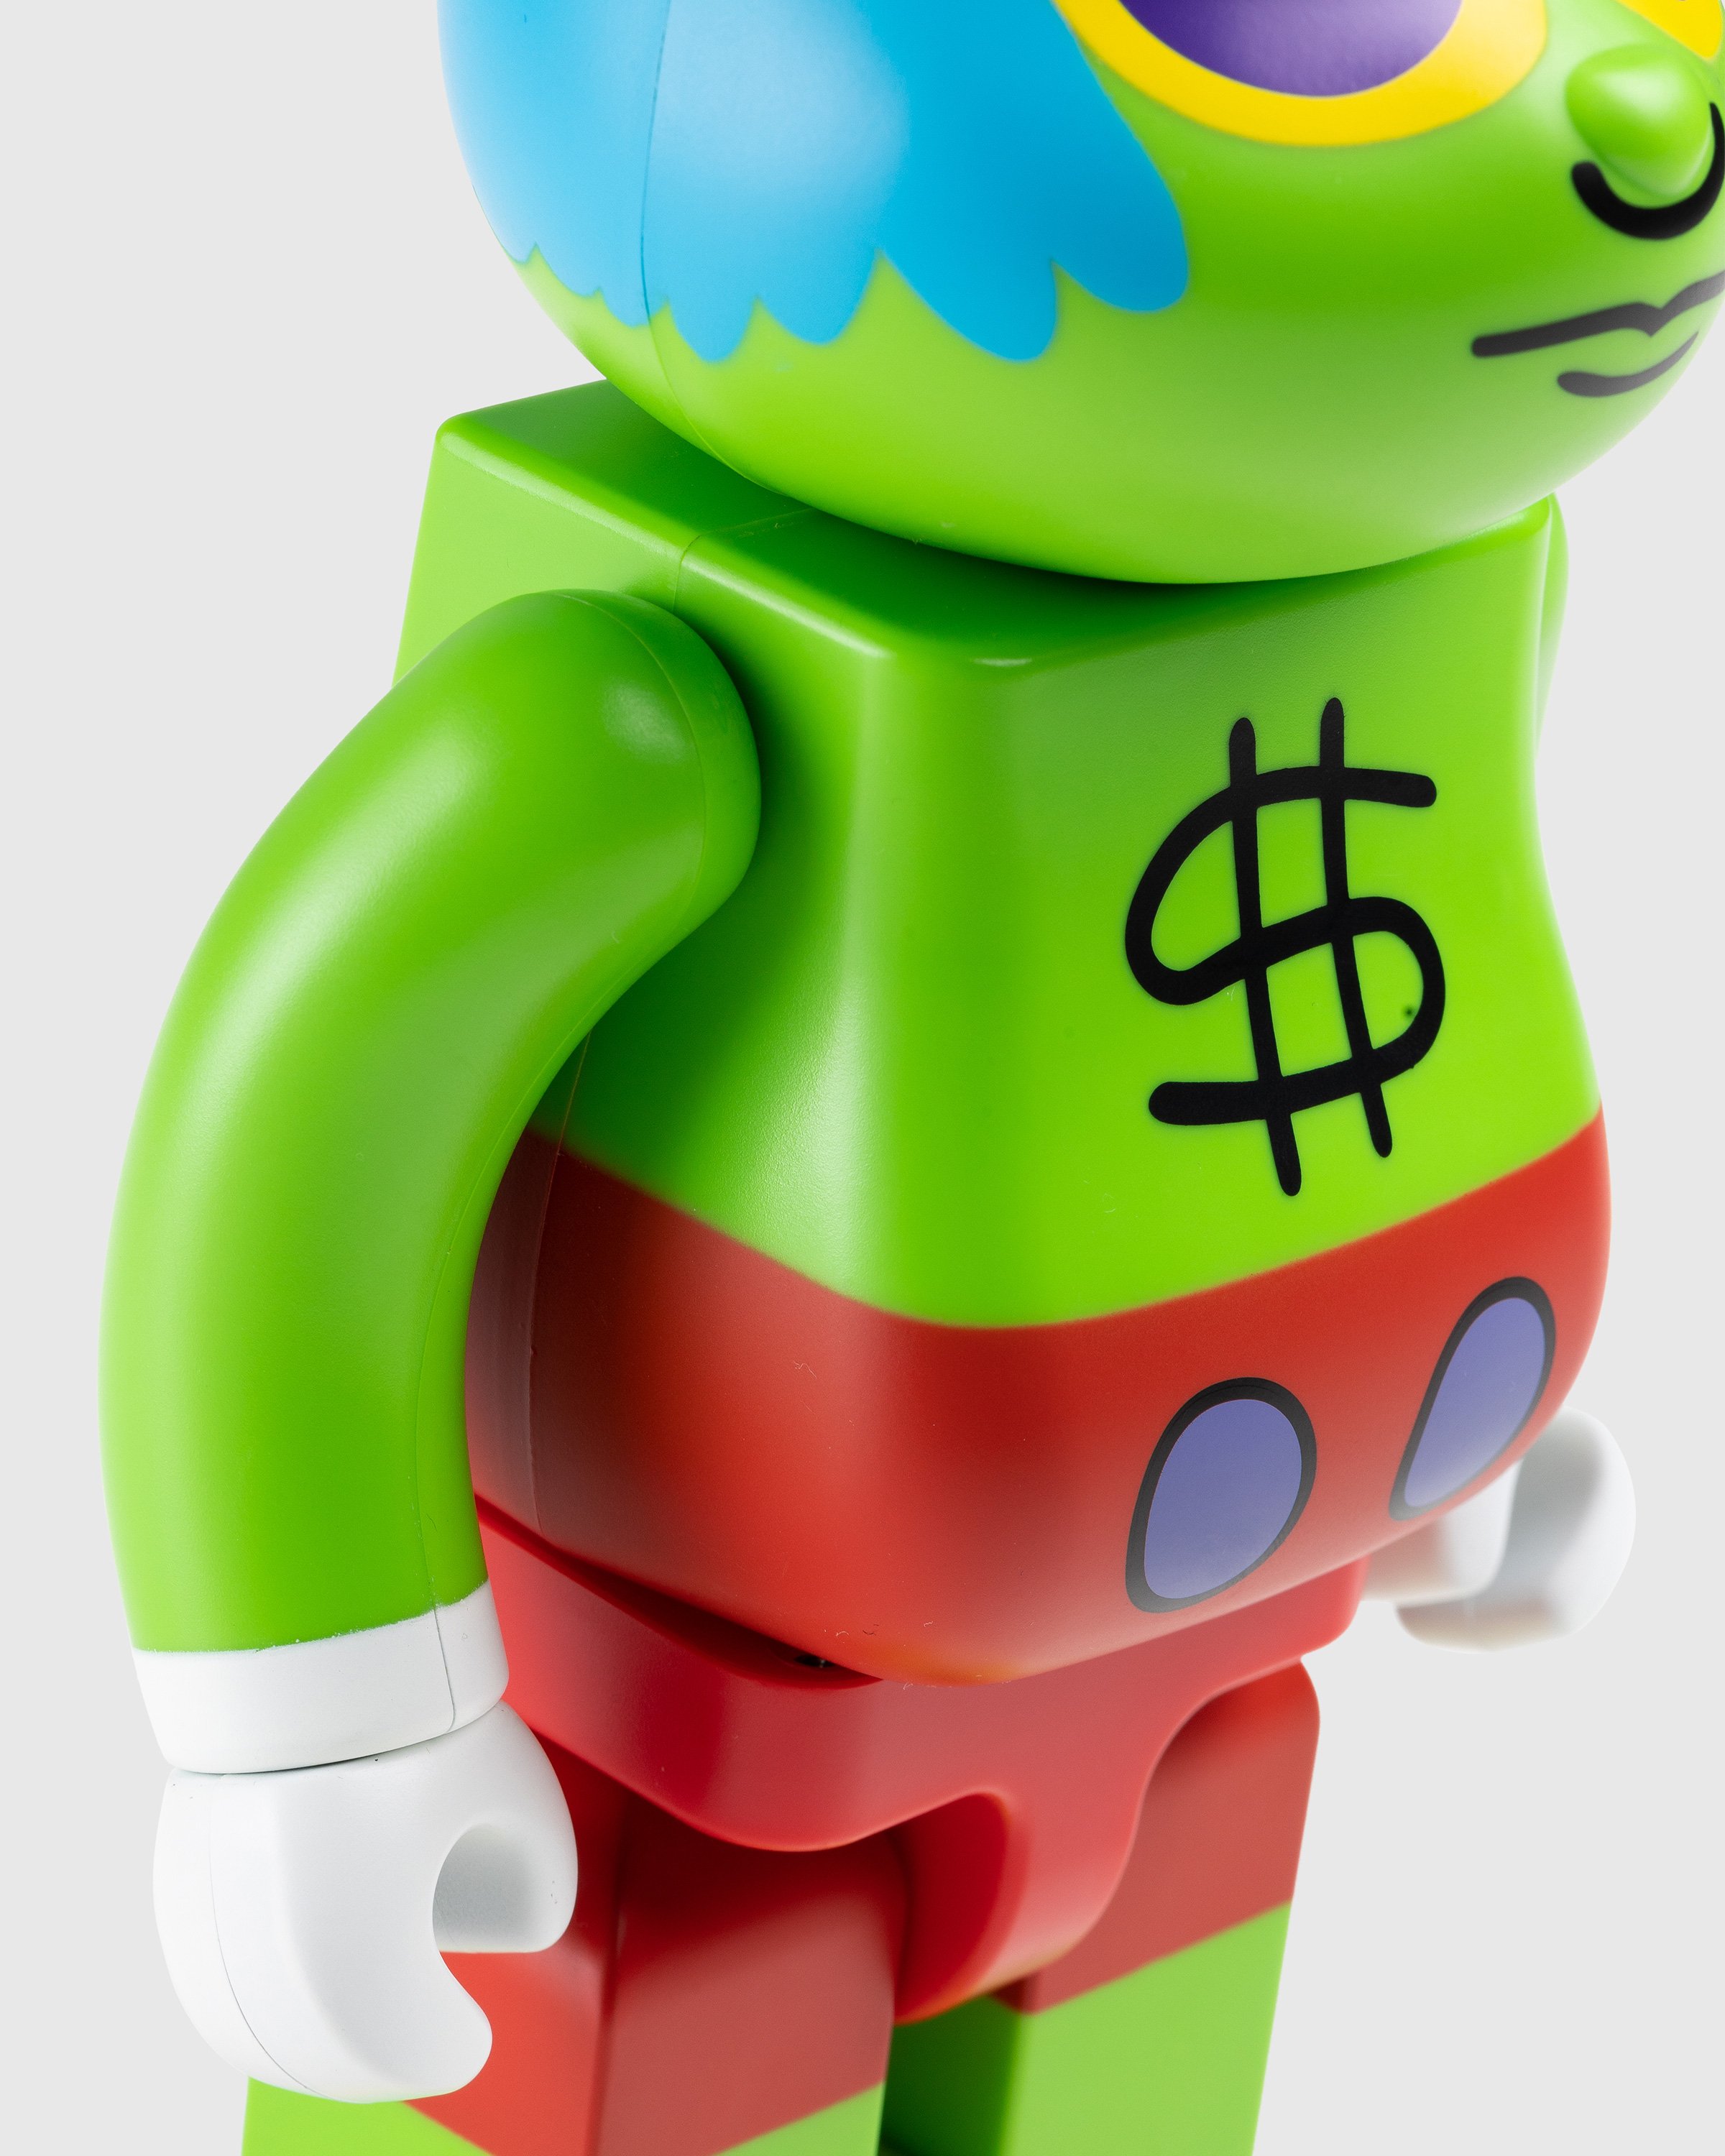 Medicom - Be@rbrick Andy Mouse 400% Green - Lifestyle - Multi - Image 6